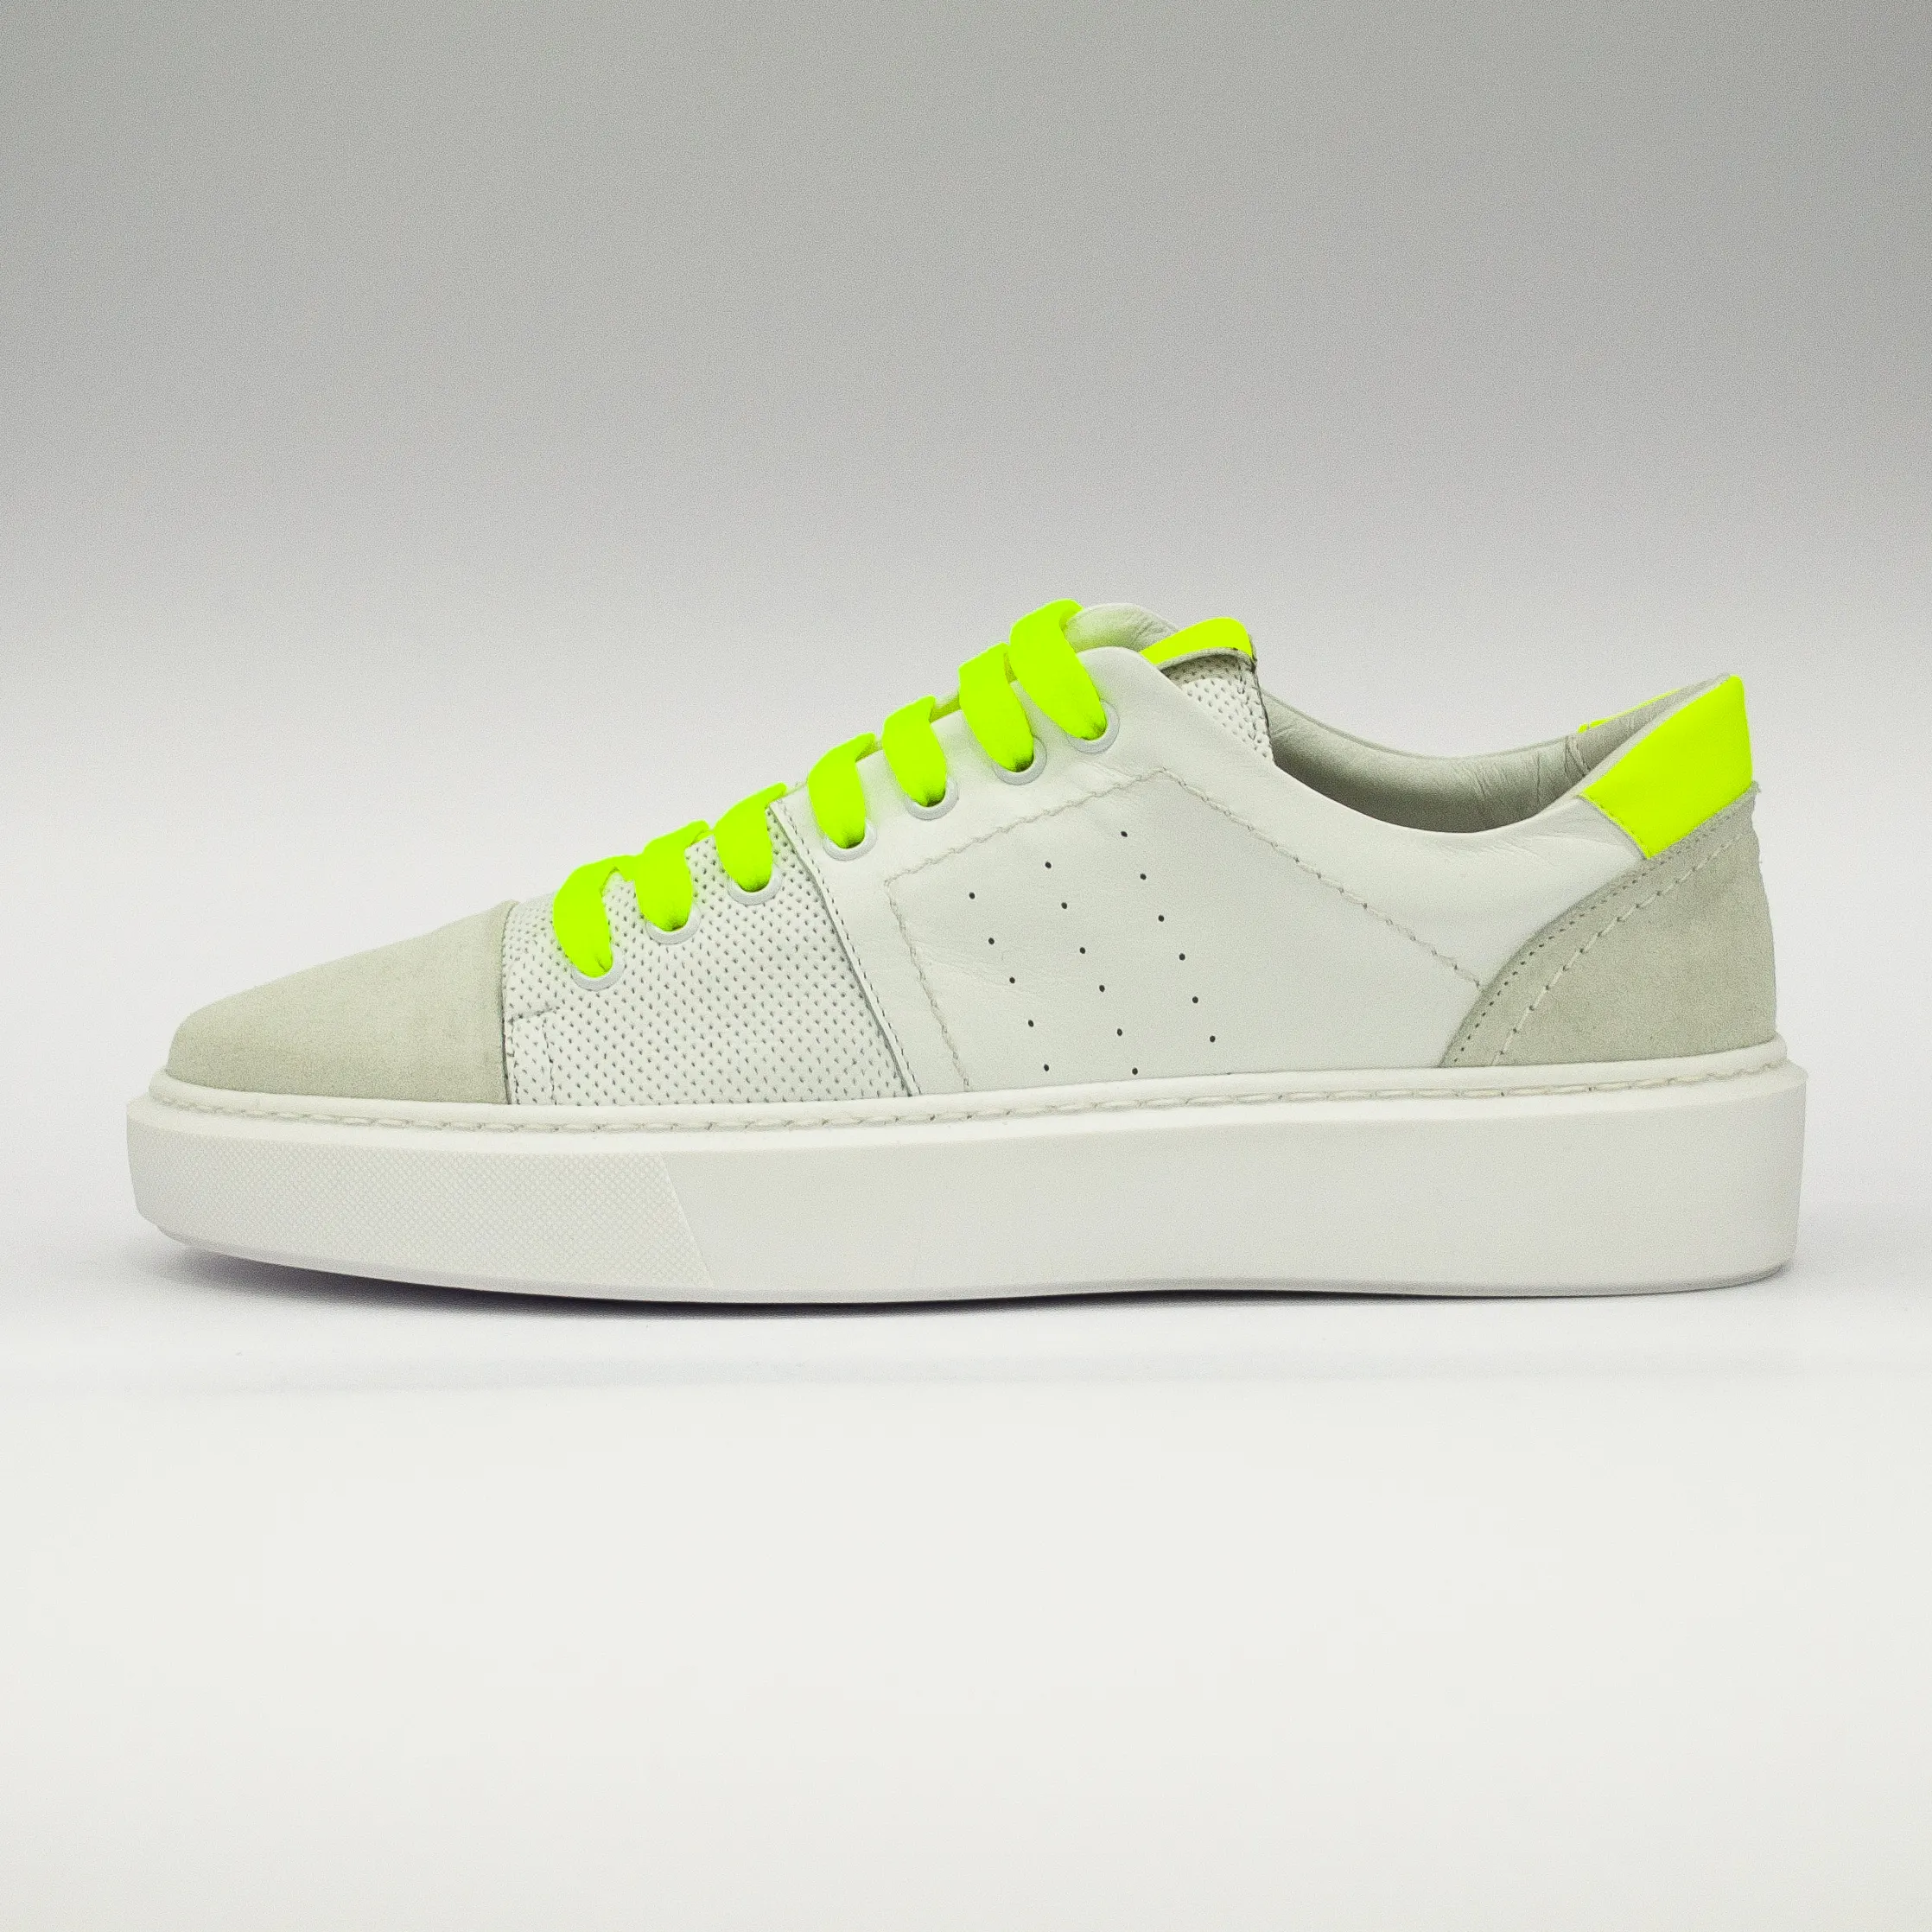 2515 CAM. BIANCO + VITE. MICROFORATO + FLUO G. FASHION SNEAKERS MADE IN ITALY. REAL PREMIUM LEATHER. AVAILABLE IN ALL THE COLORS